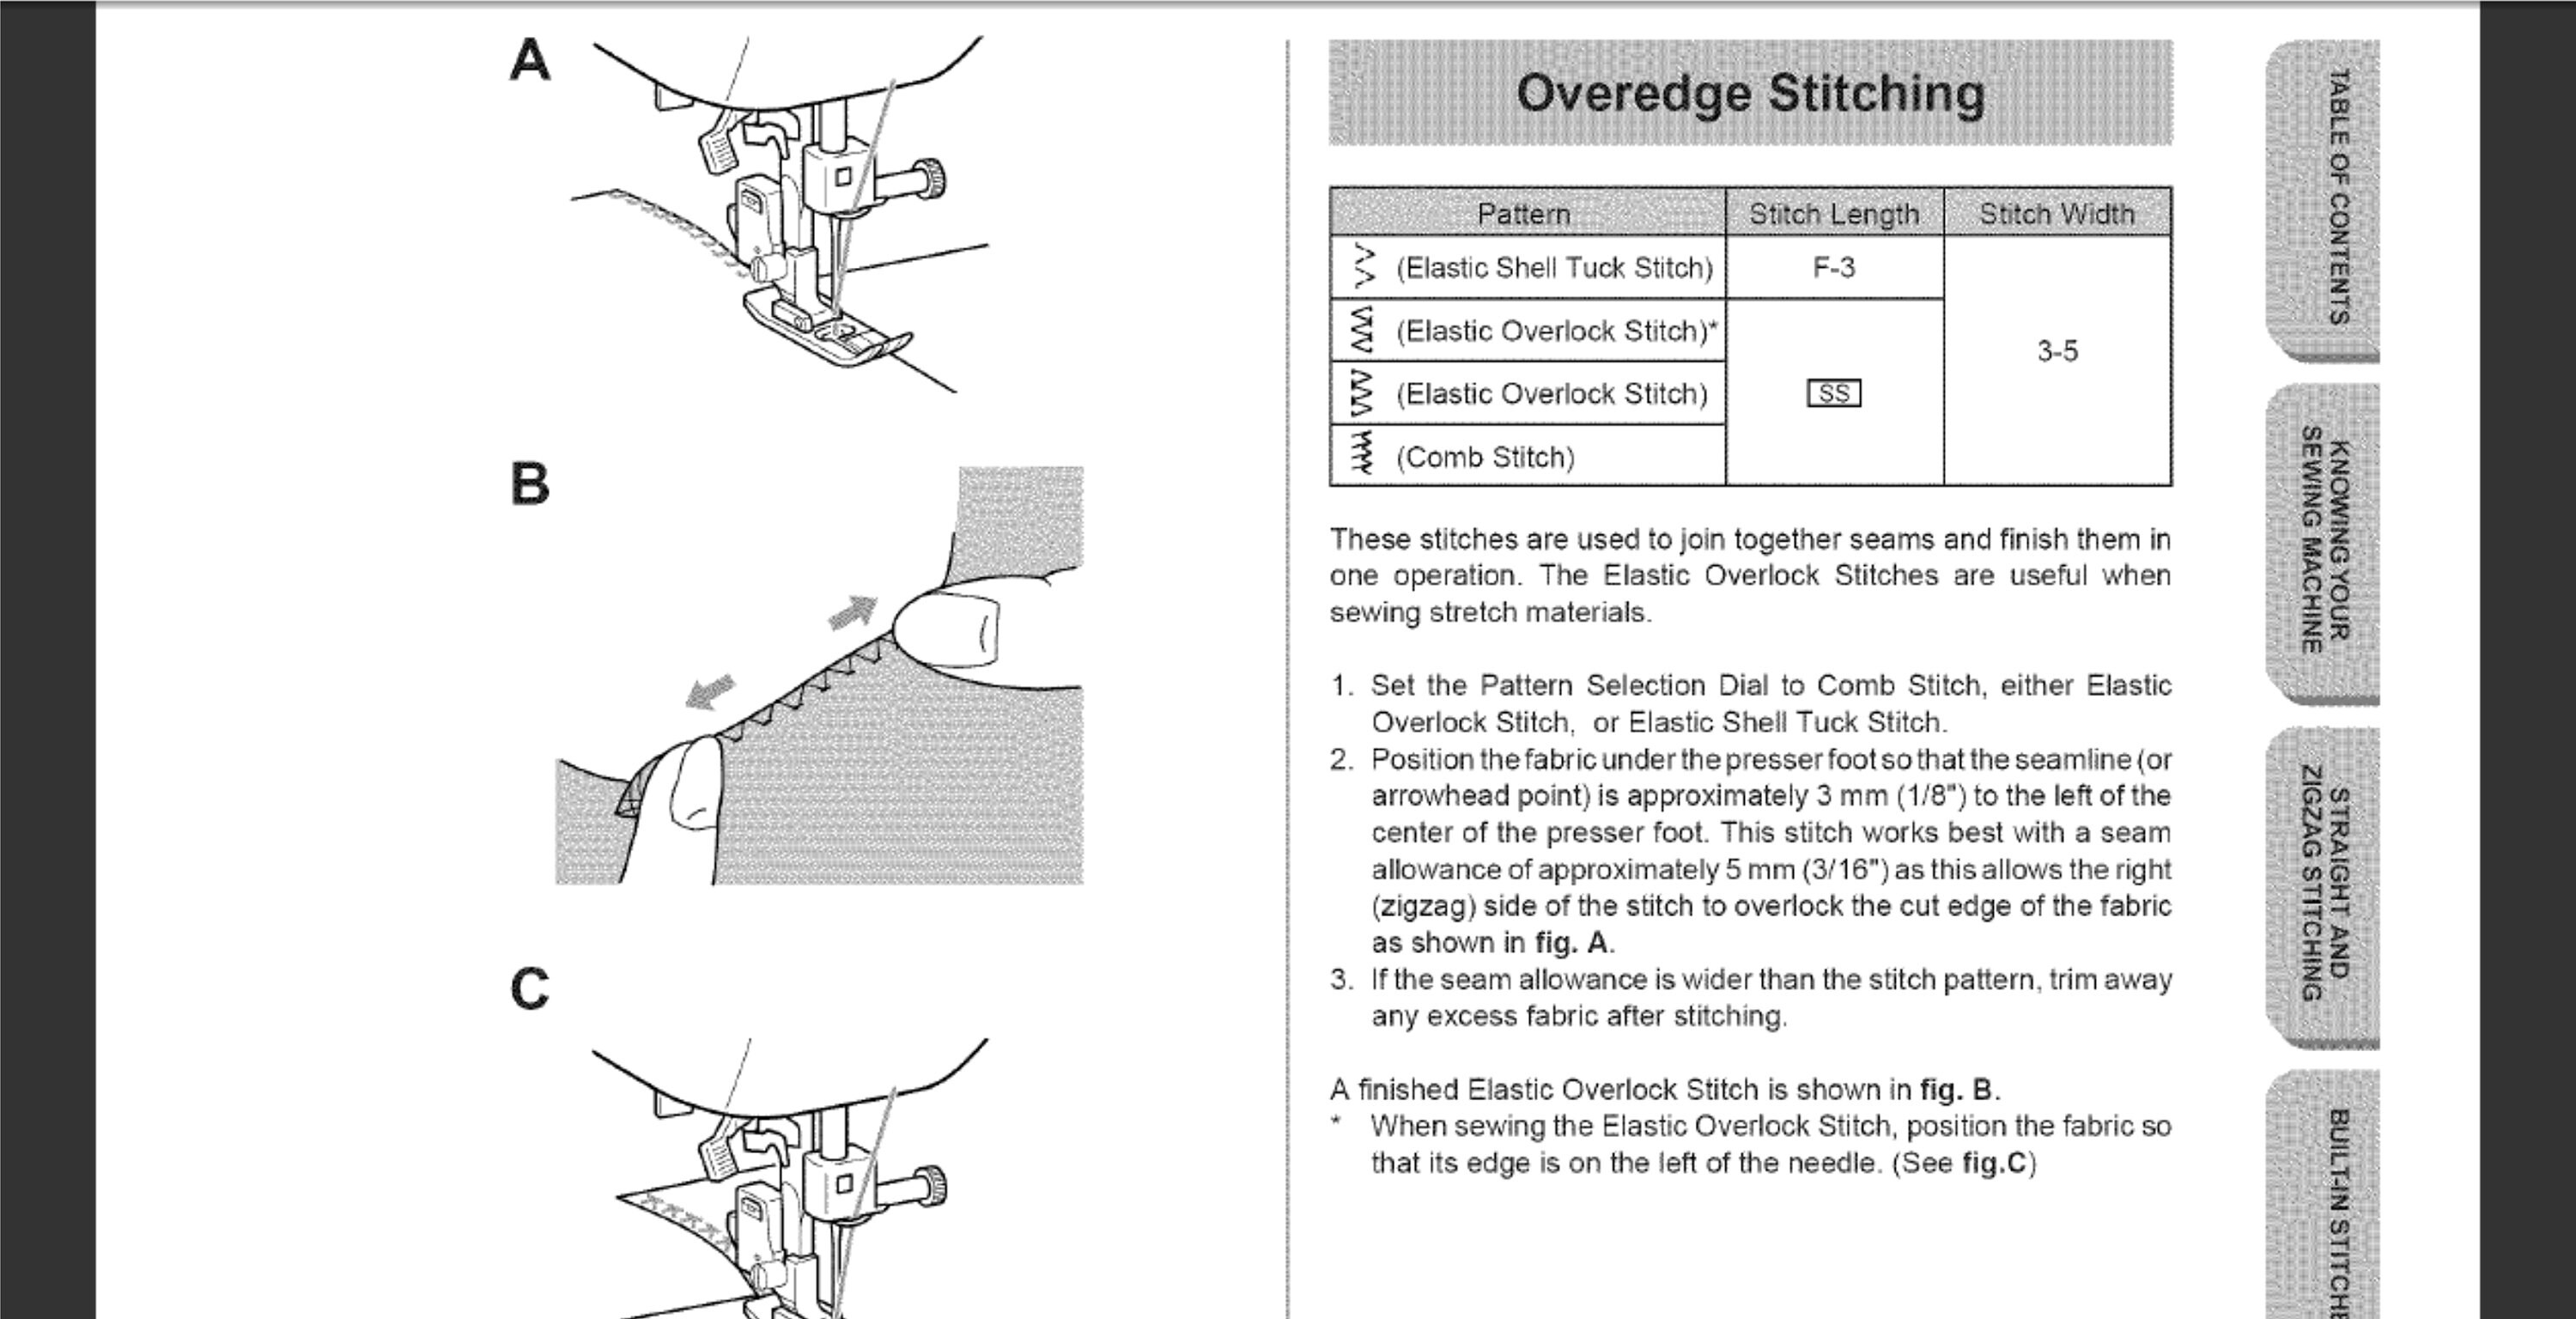 Brother SE600 Sewing Machine Instruction Manual User Manual